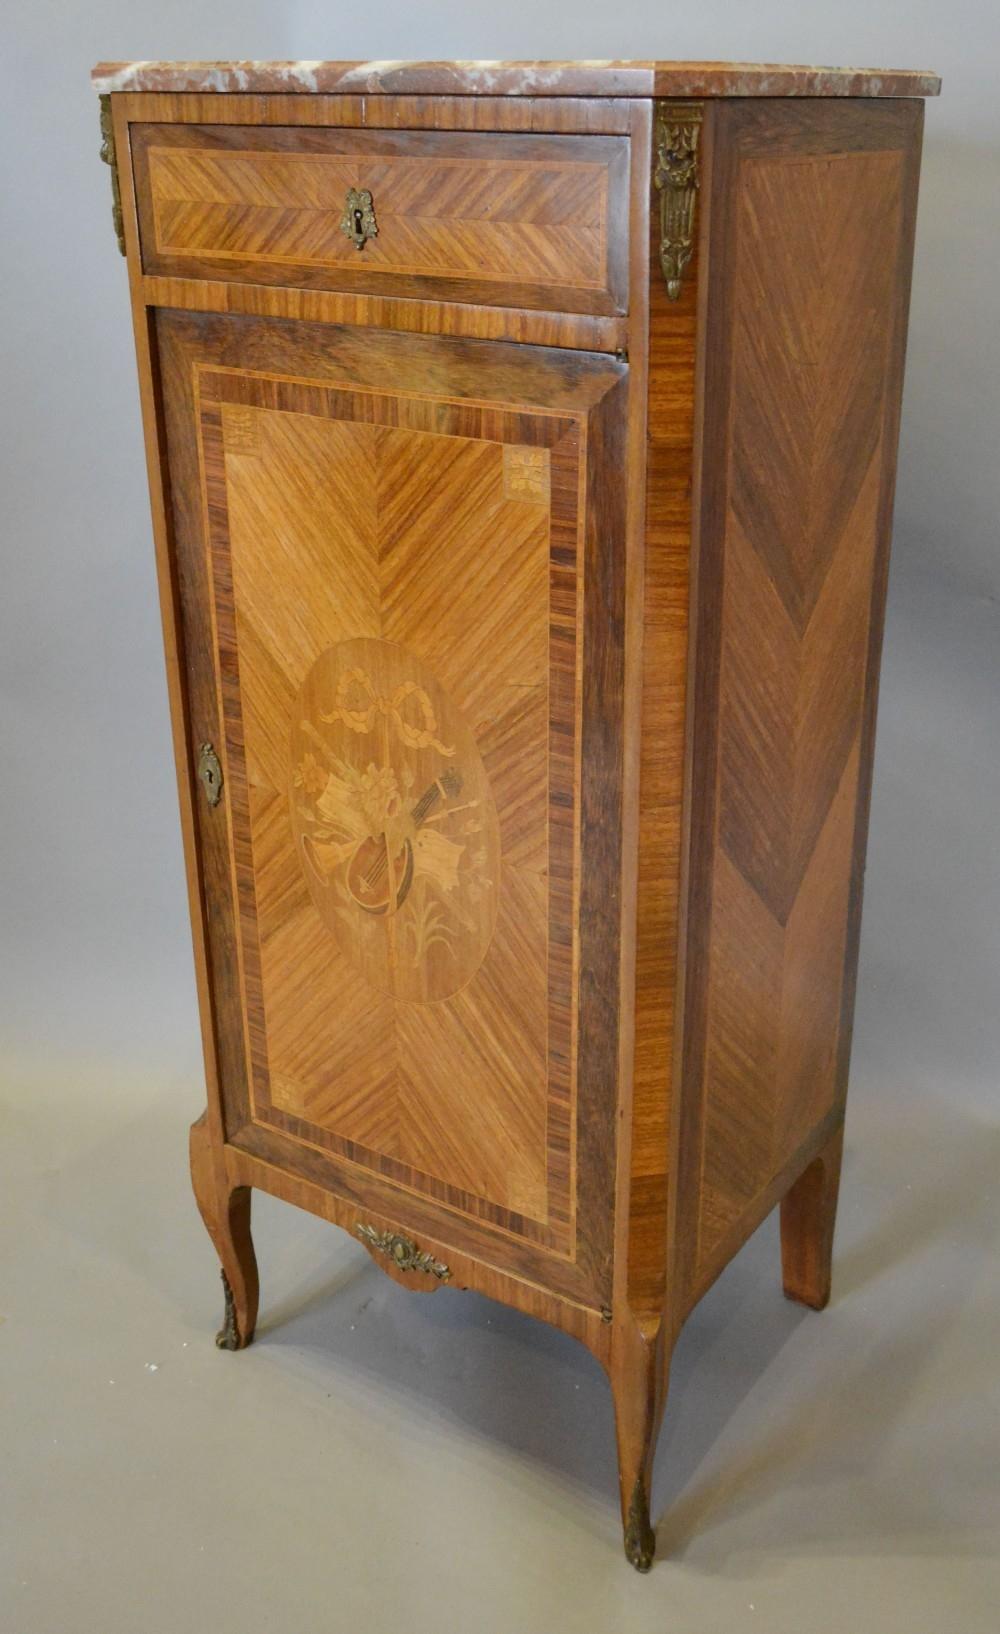 A French Kingwood and Marquetry Inlaid Side Cabinet with a Rouge Marble top above a frieze drawer